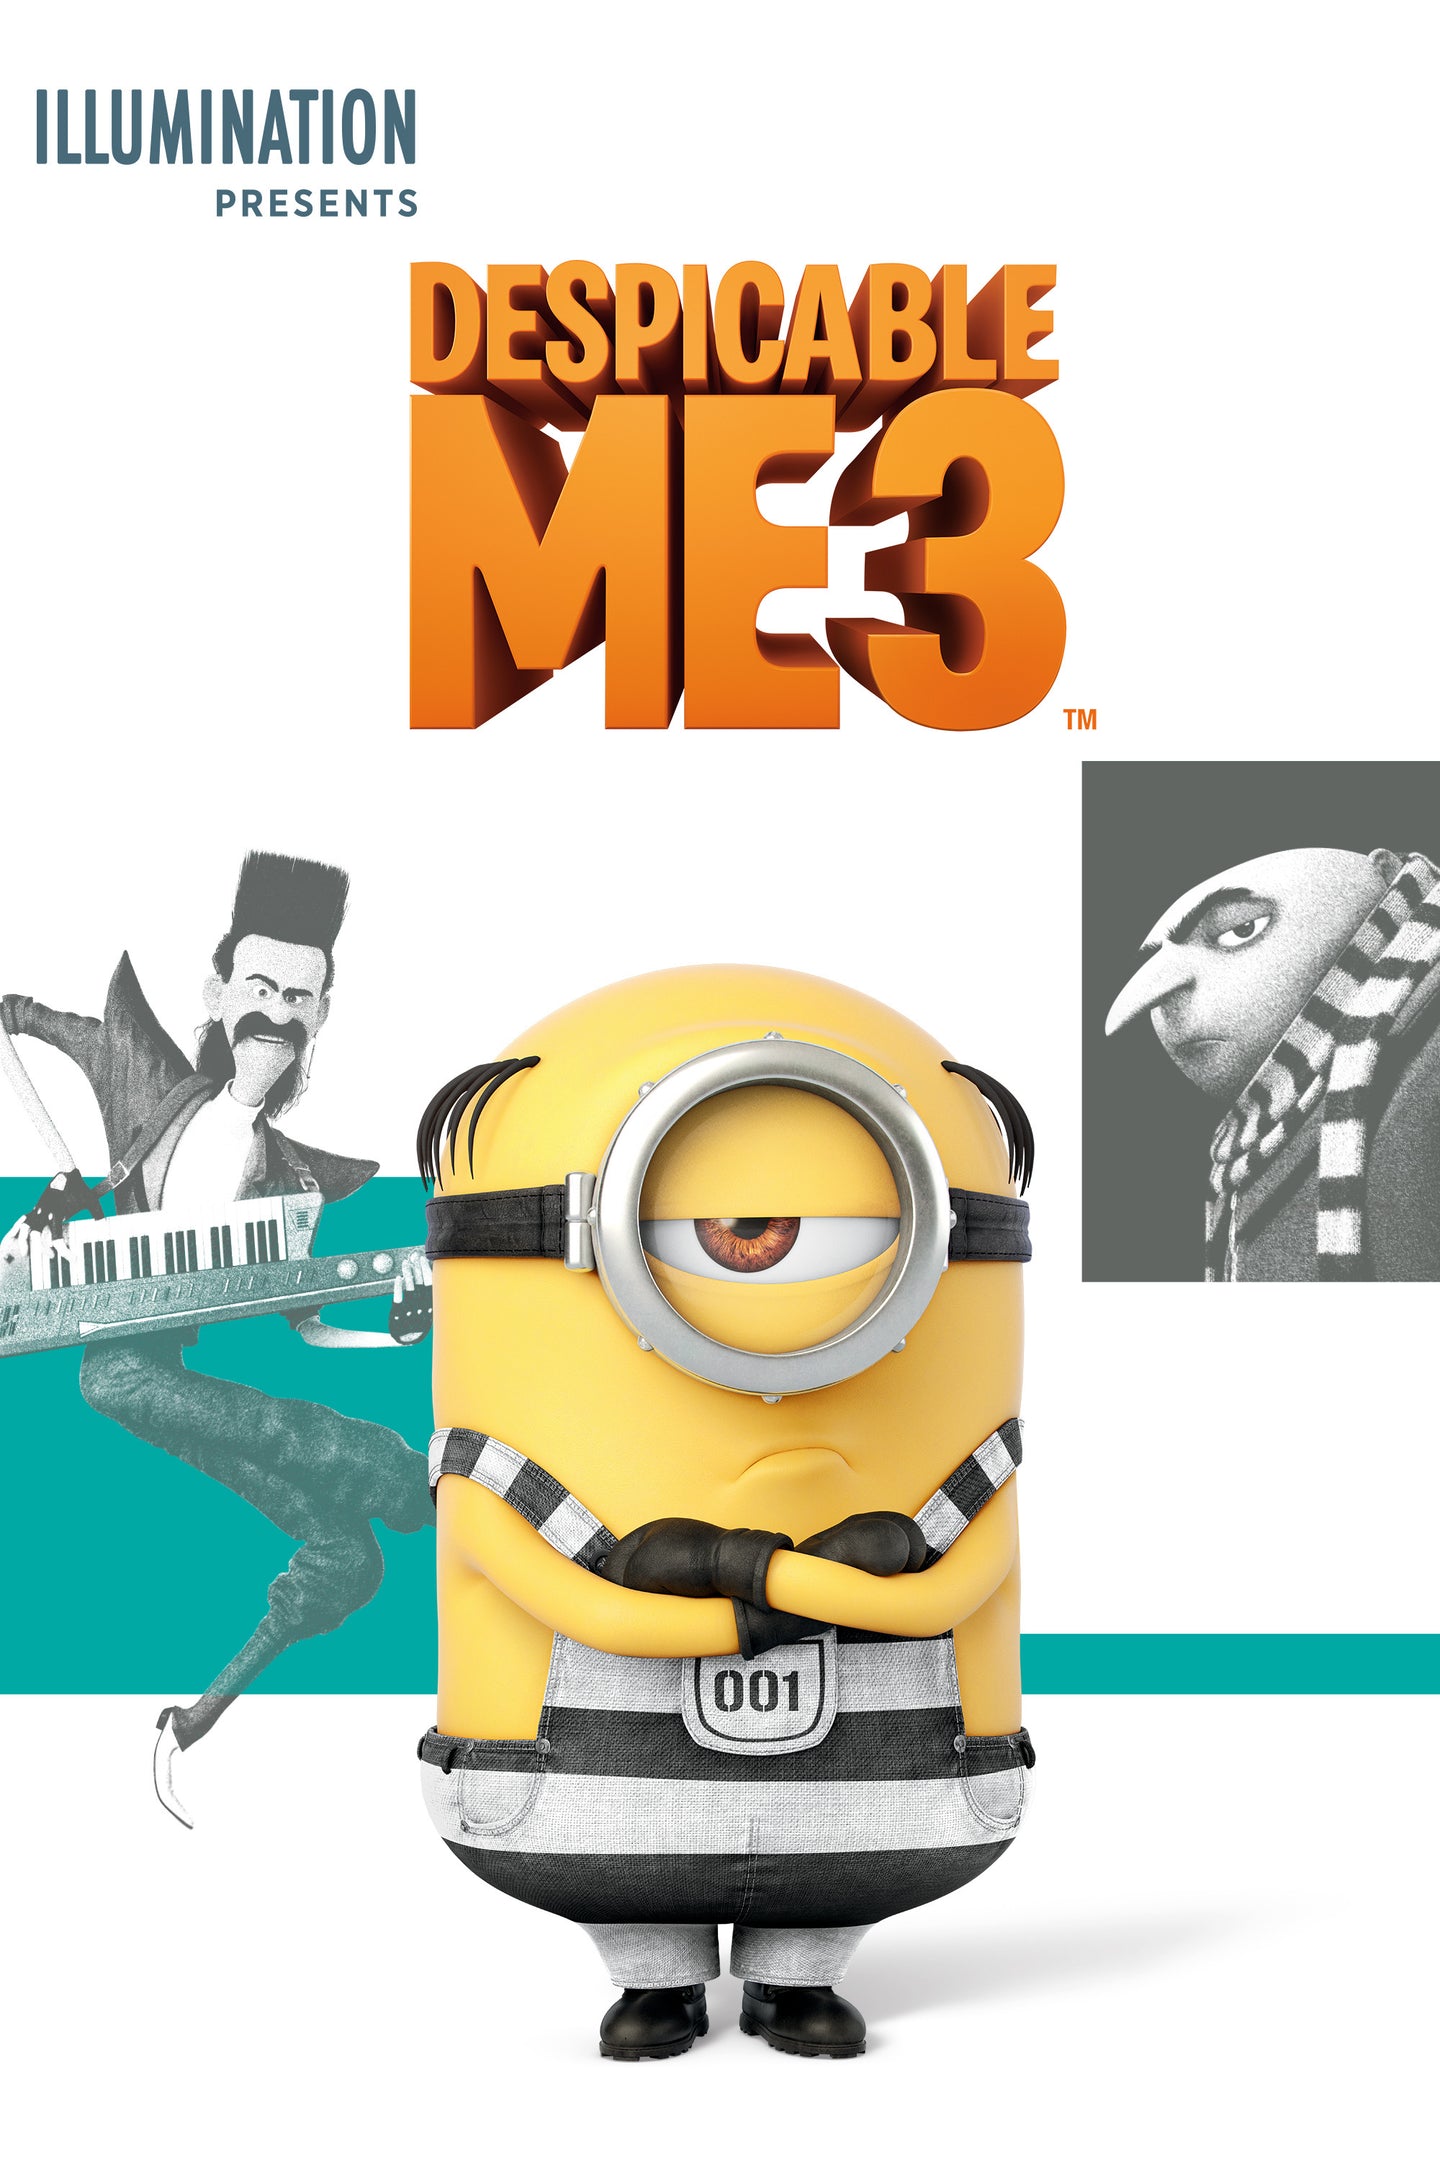 Despicable Me 3 (2017) Vudu or Movies Anywhere HD redemption only